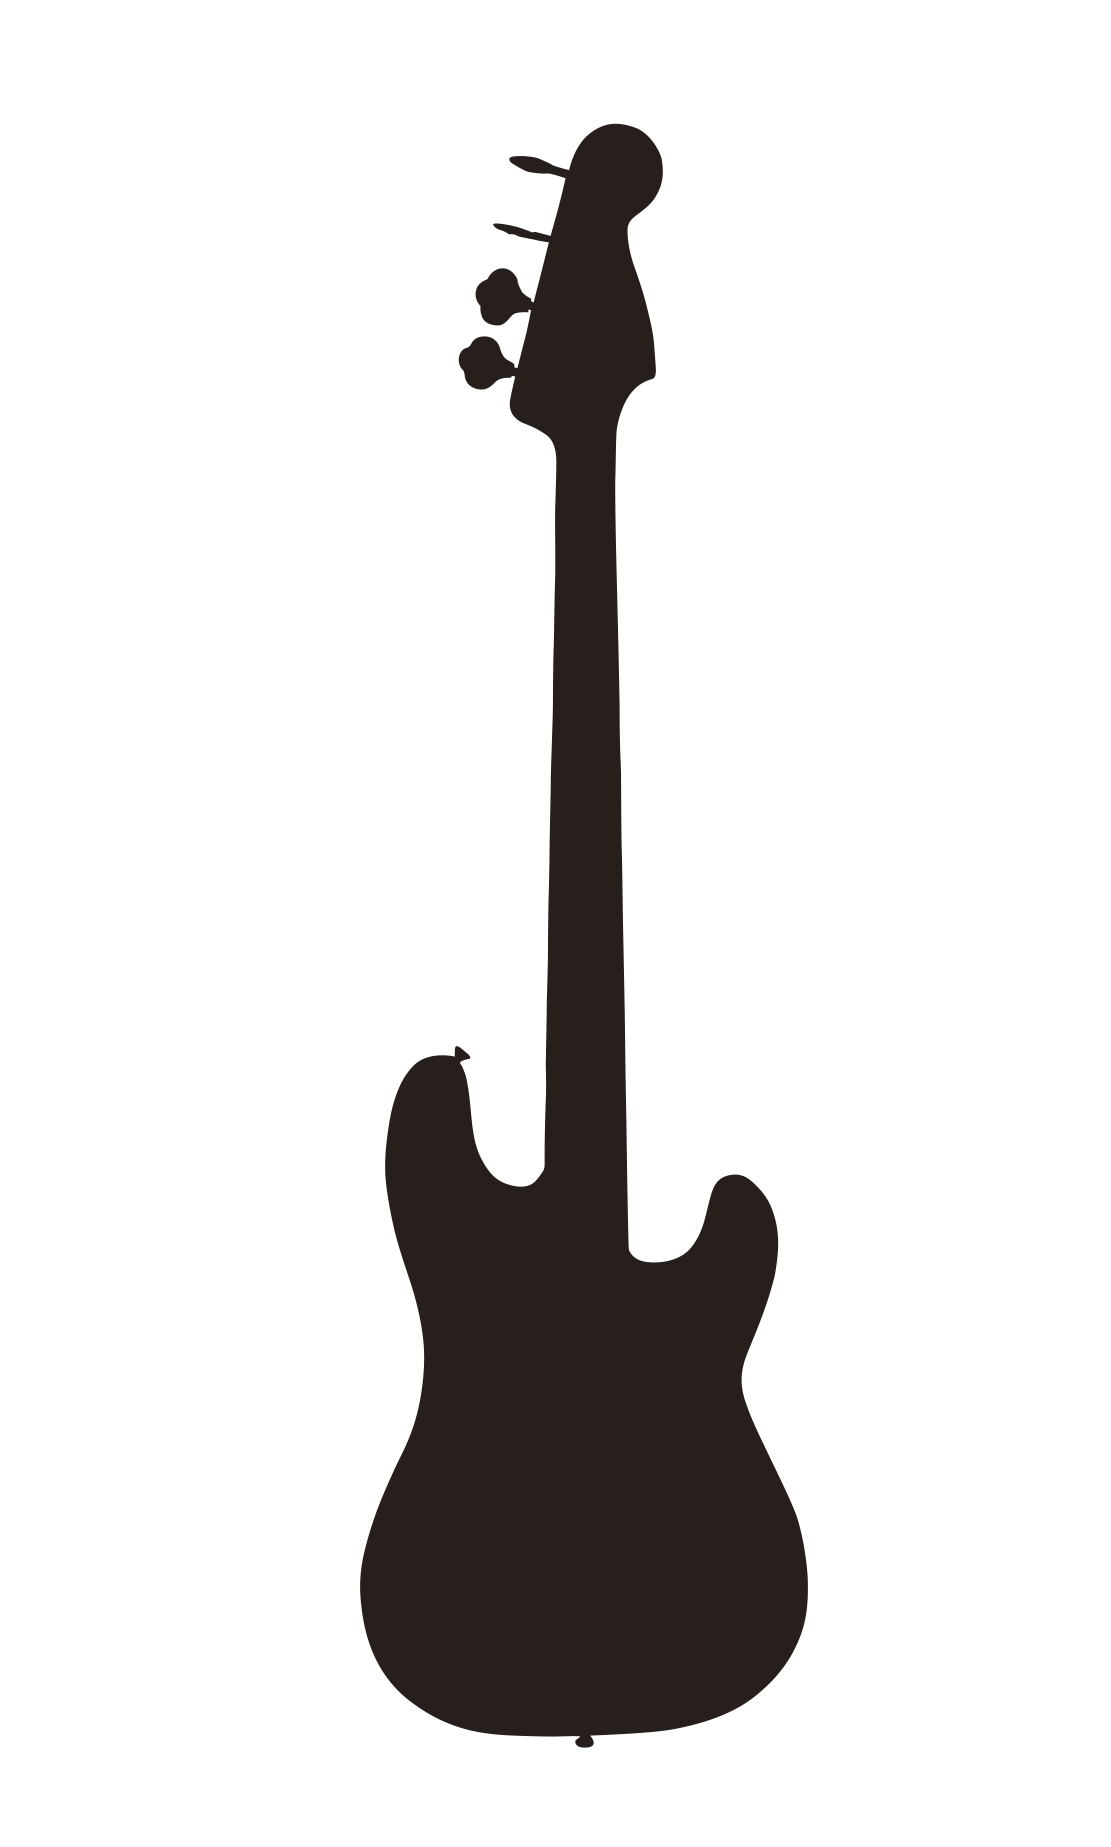 Png Guitar Silhouette - File:guitar Silhouette.png, Transparent background PNG HD thumbnail